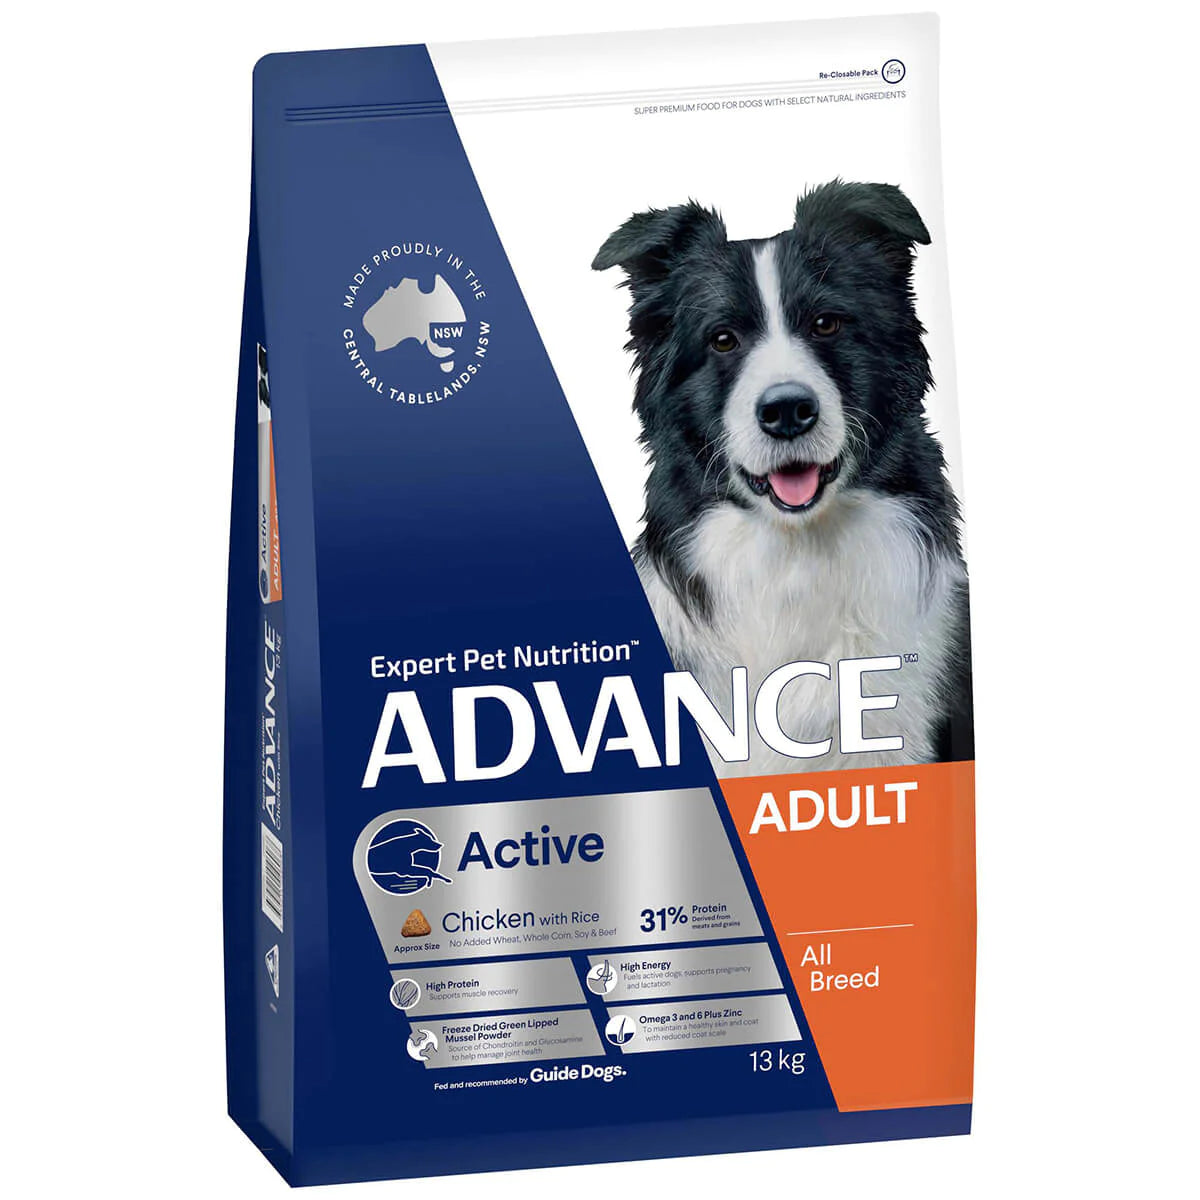 ADVANCE Active Adult Chicken with Rice Dry Dog Food - 13kg